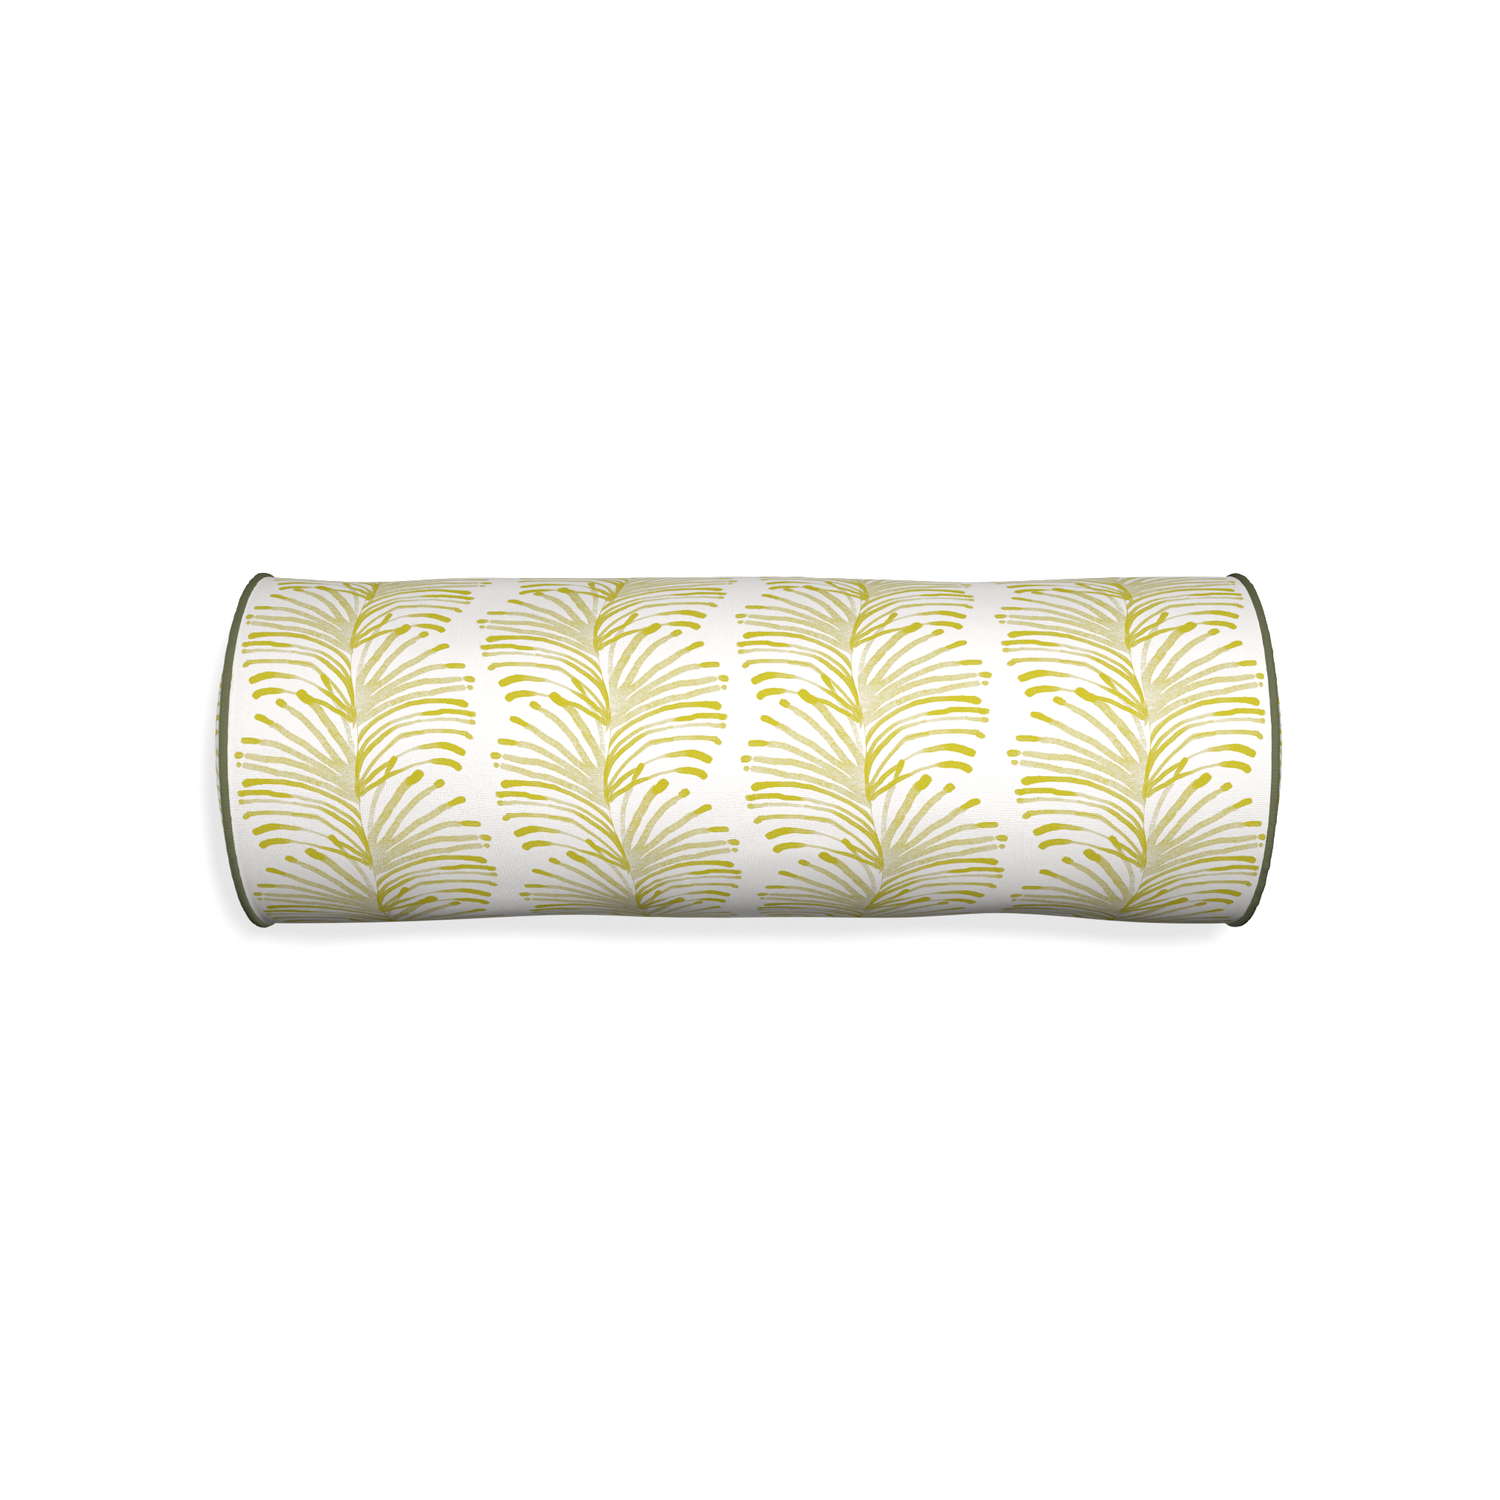 Bolster emma chartreuse custom pillow with f piping on white background